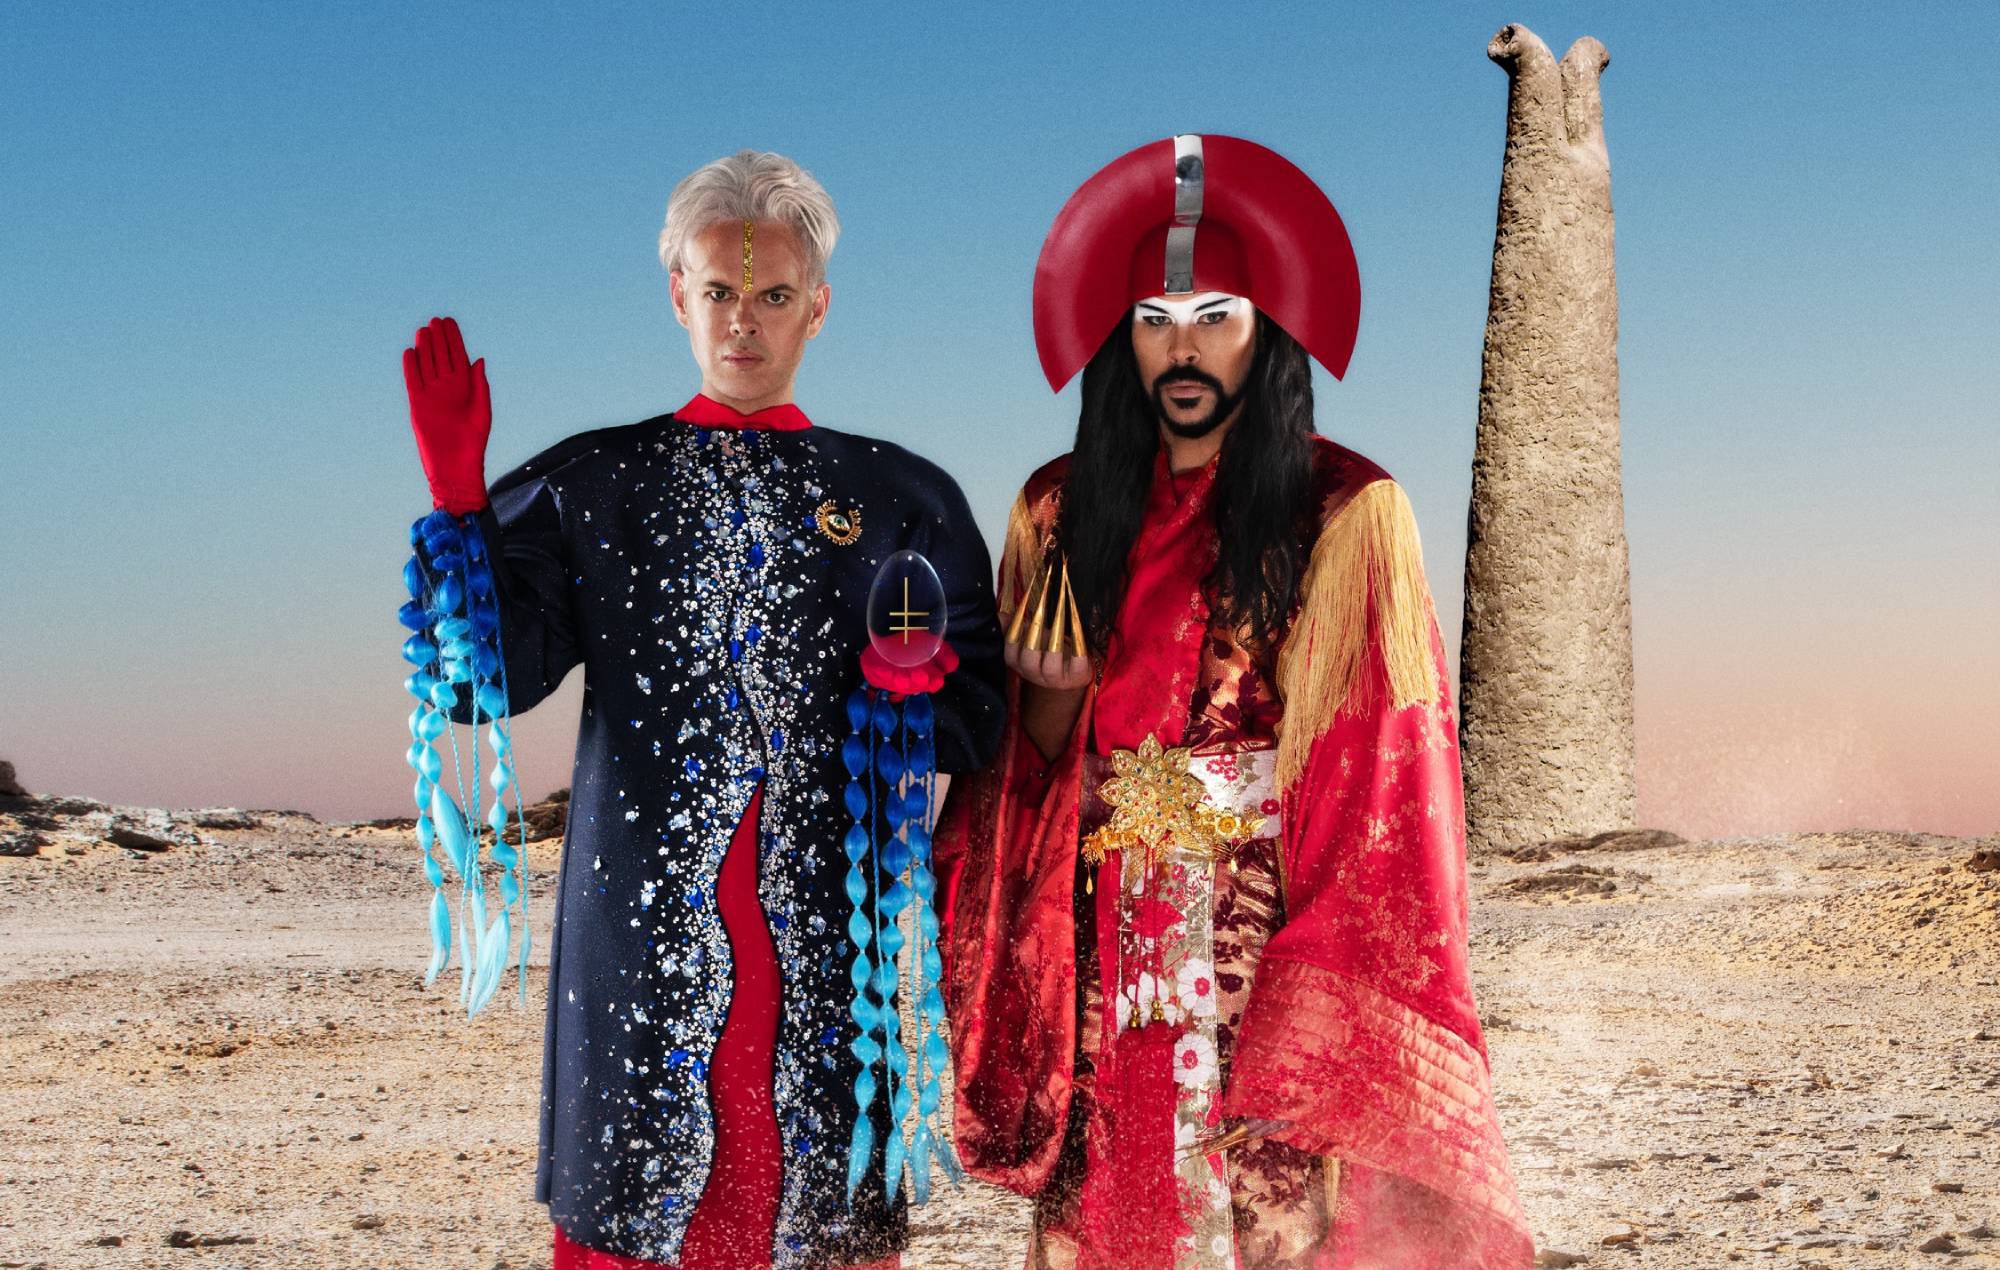 Empire Of The Sun see in new era with “breakthrough track” ‘Changes’